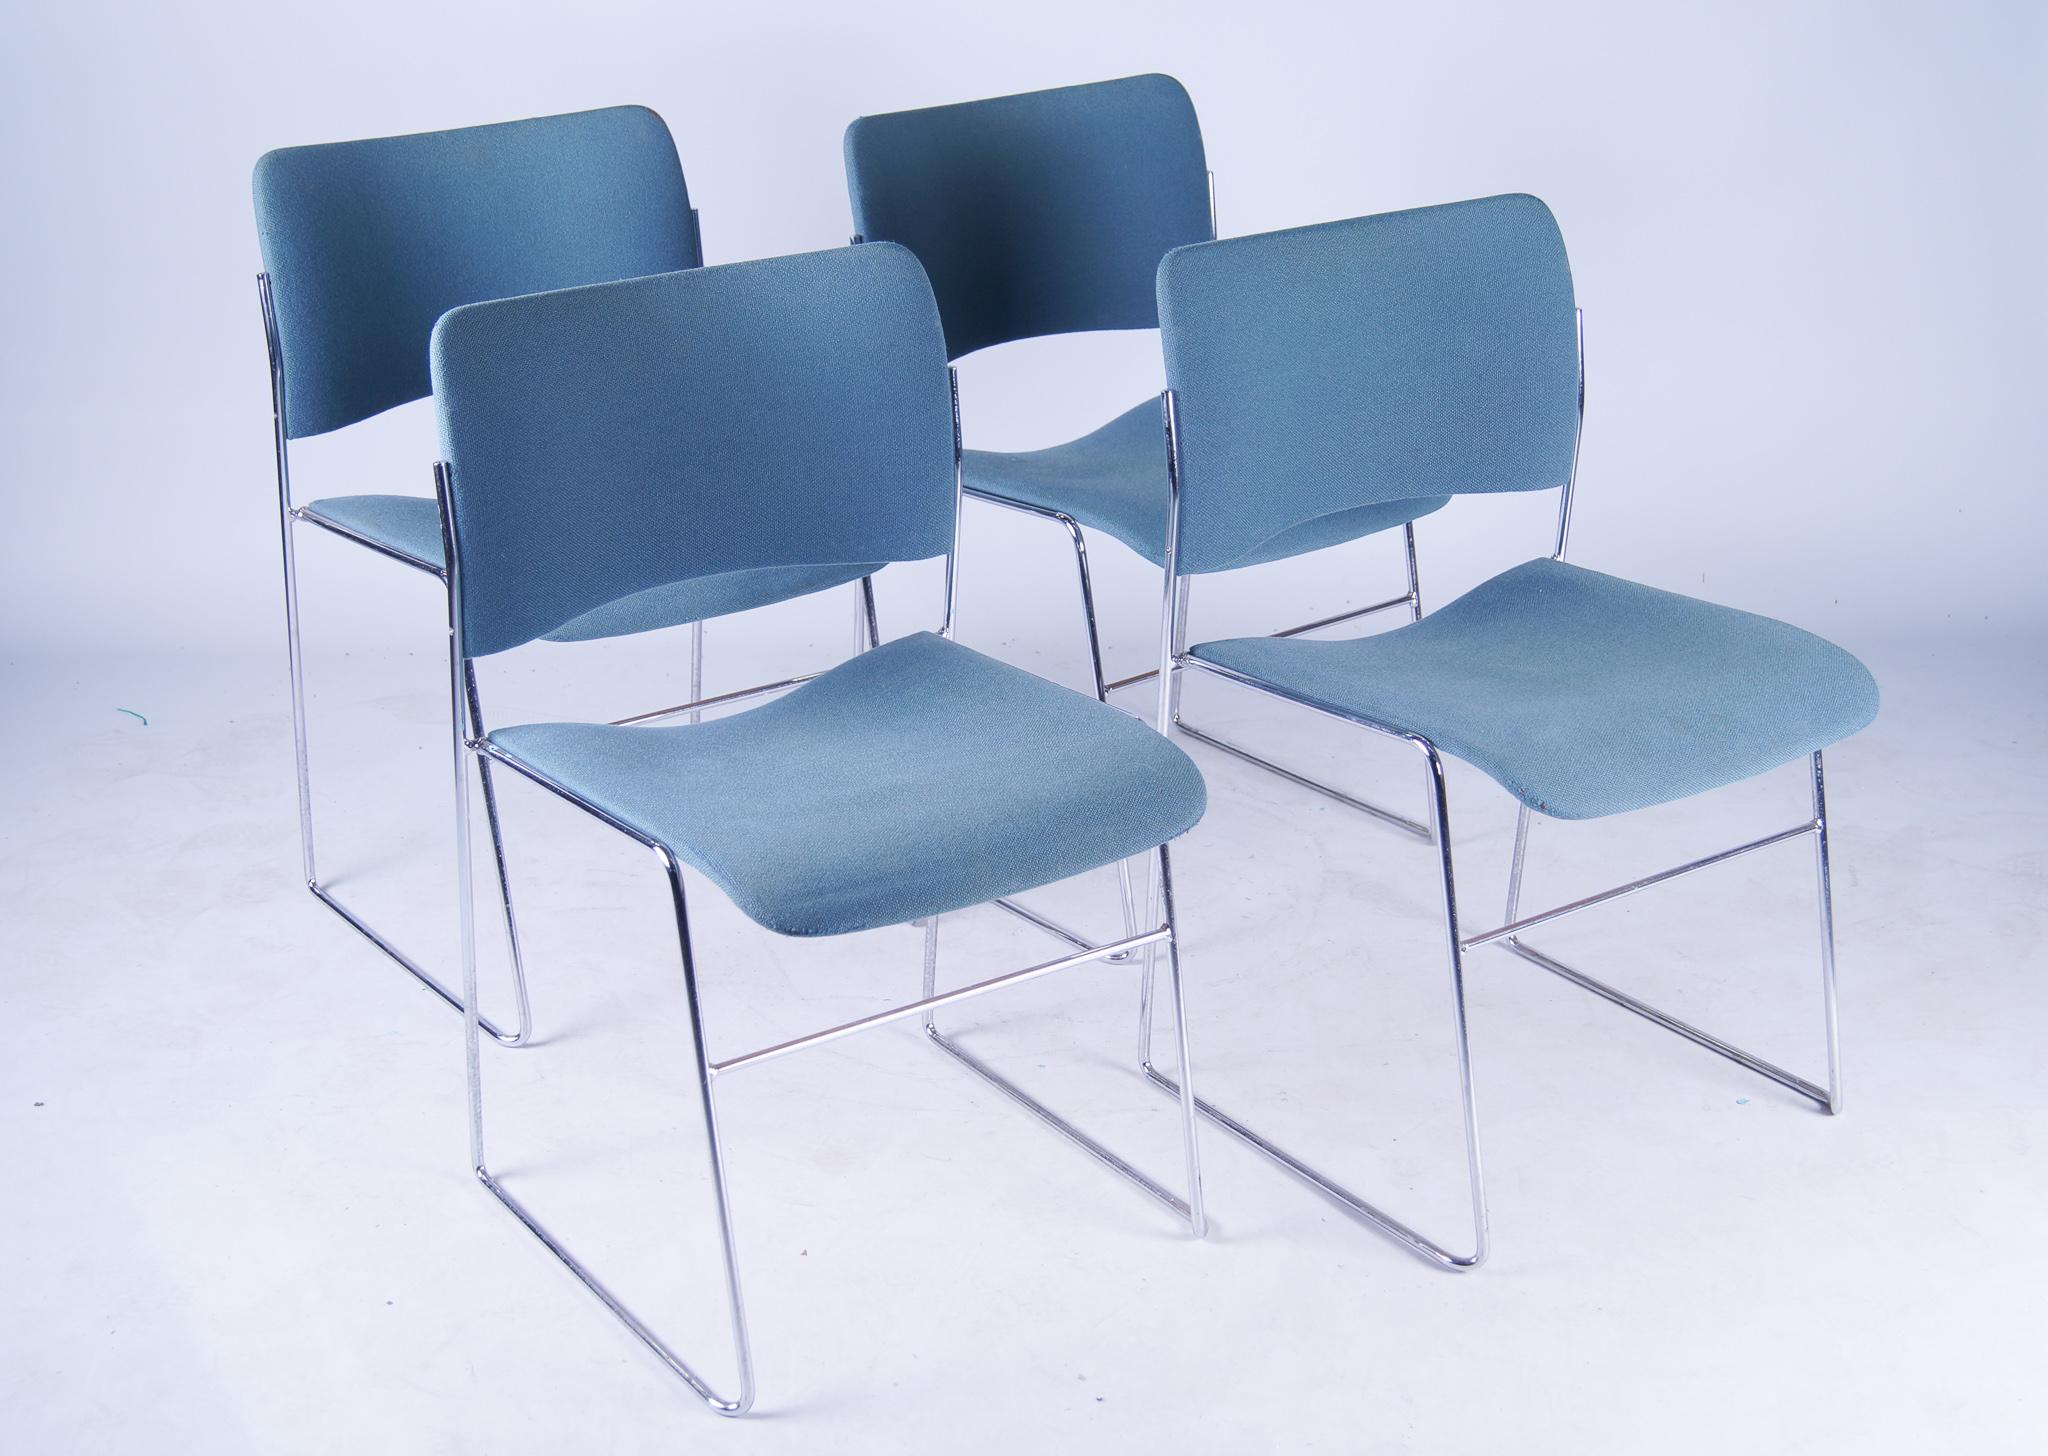 1964, United States

This stacking chair can be found in the museum for modern art in New York (MOMA) and in St' Paul Cathedral in London. This chair has the potential to go down in history as one of the most important design inventions of the